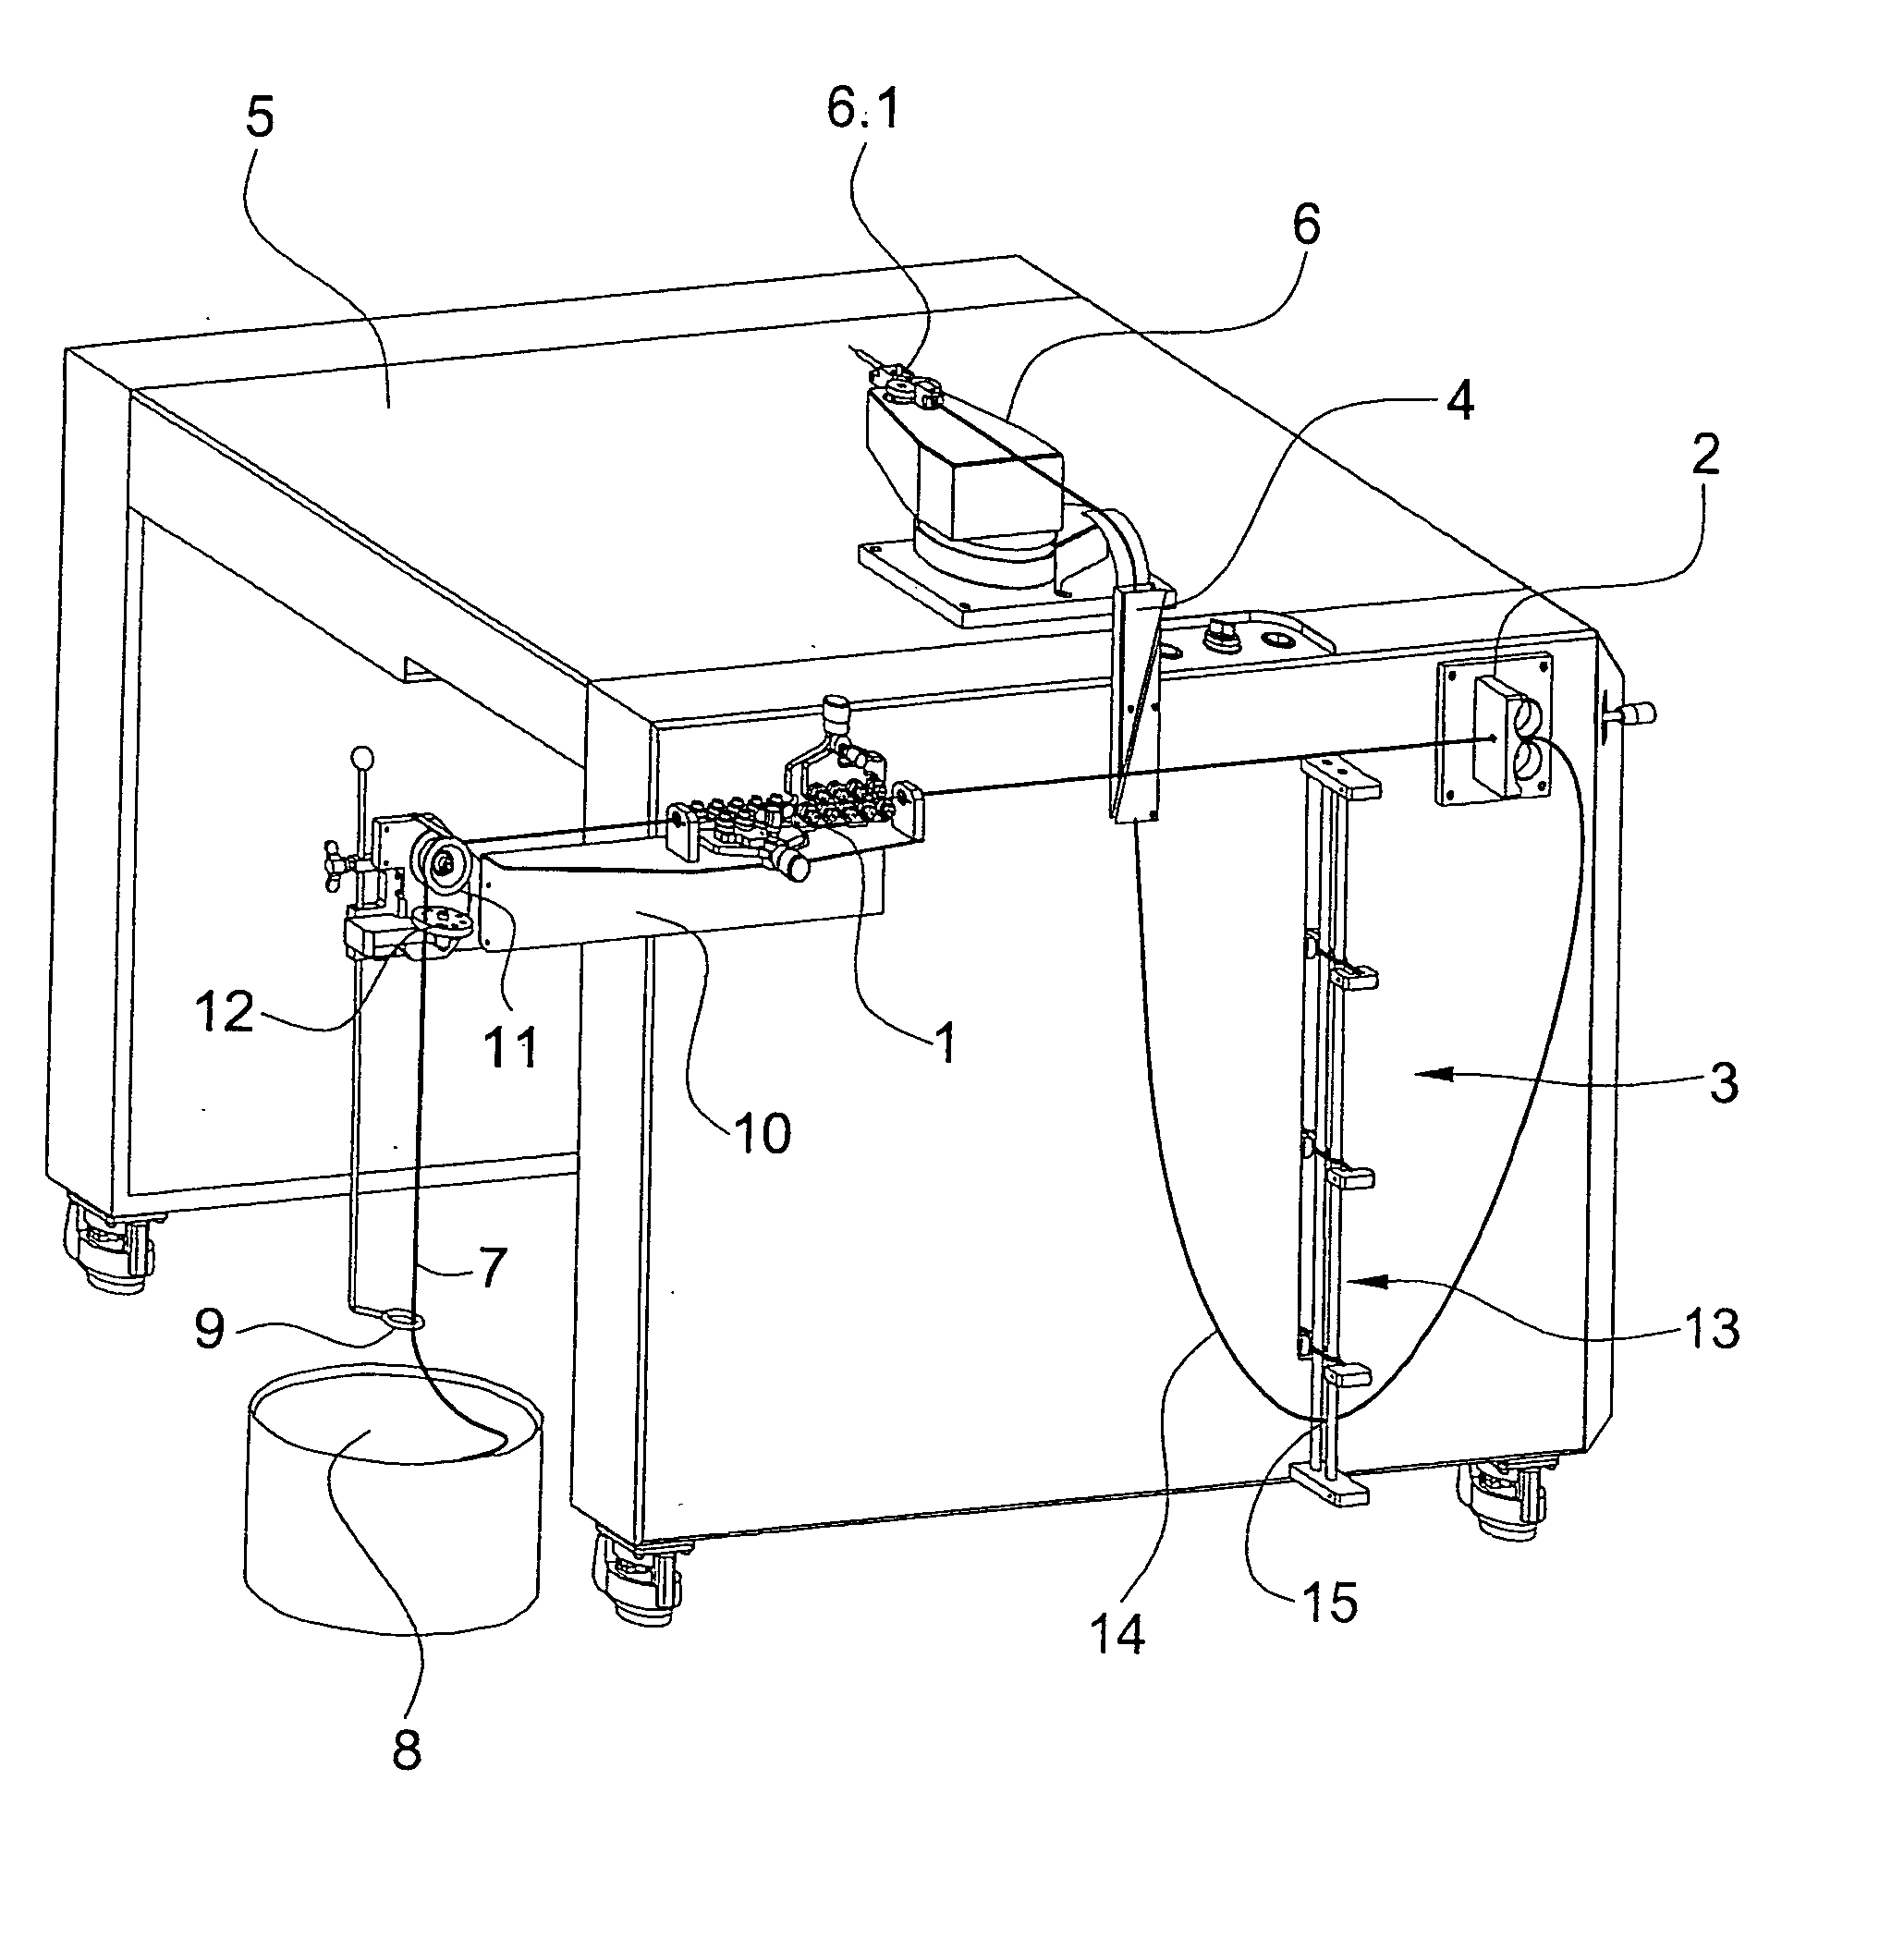 Wire-feeding device for a wire-processing machine